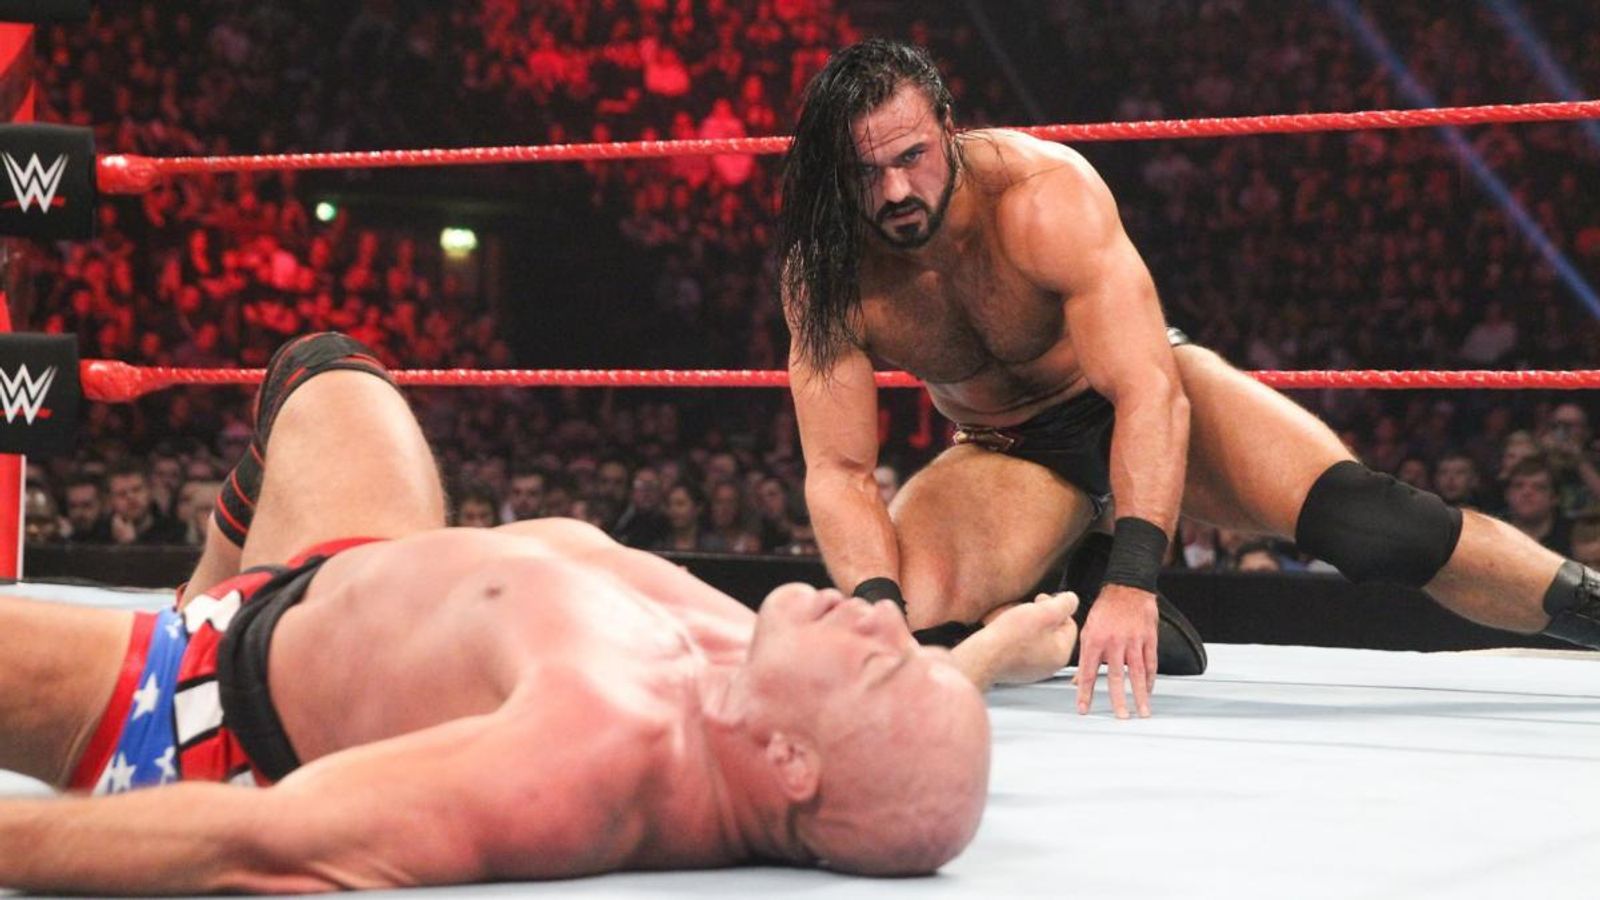 WATCH Relive the best moments of WWE Raw in Manchester WWE News